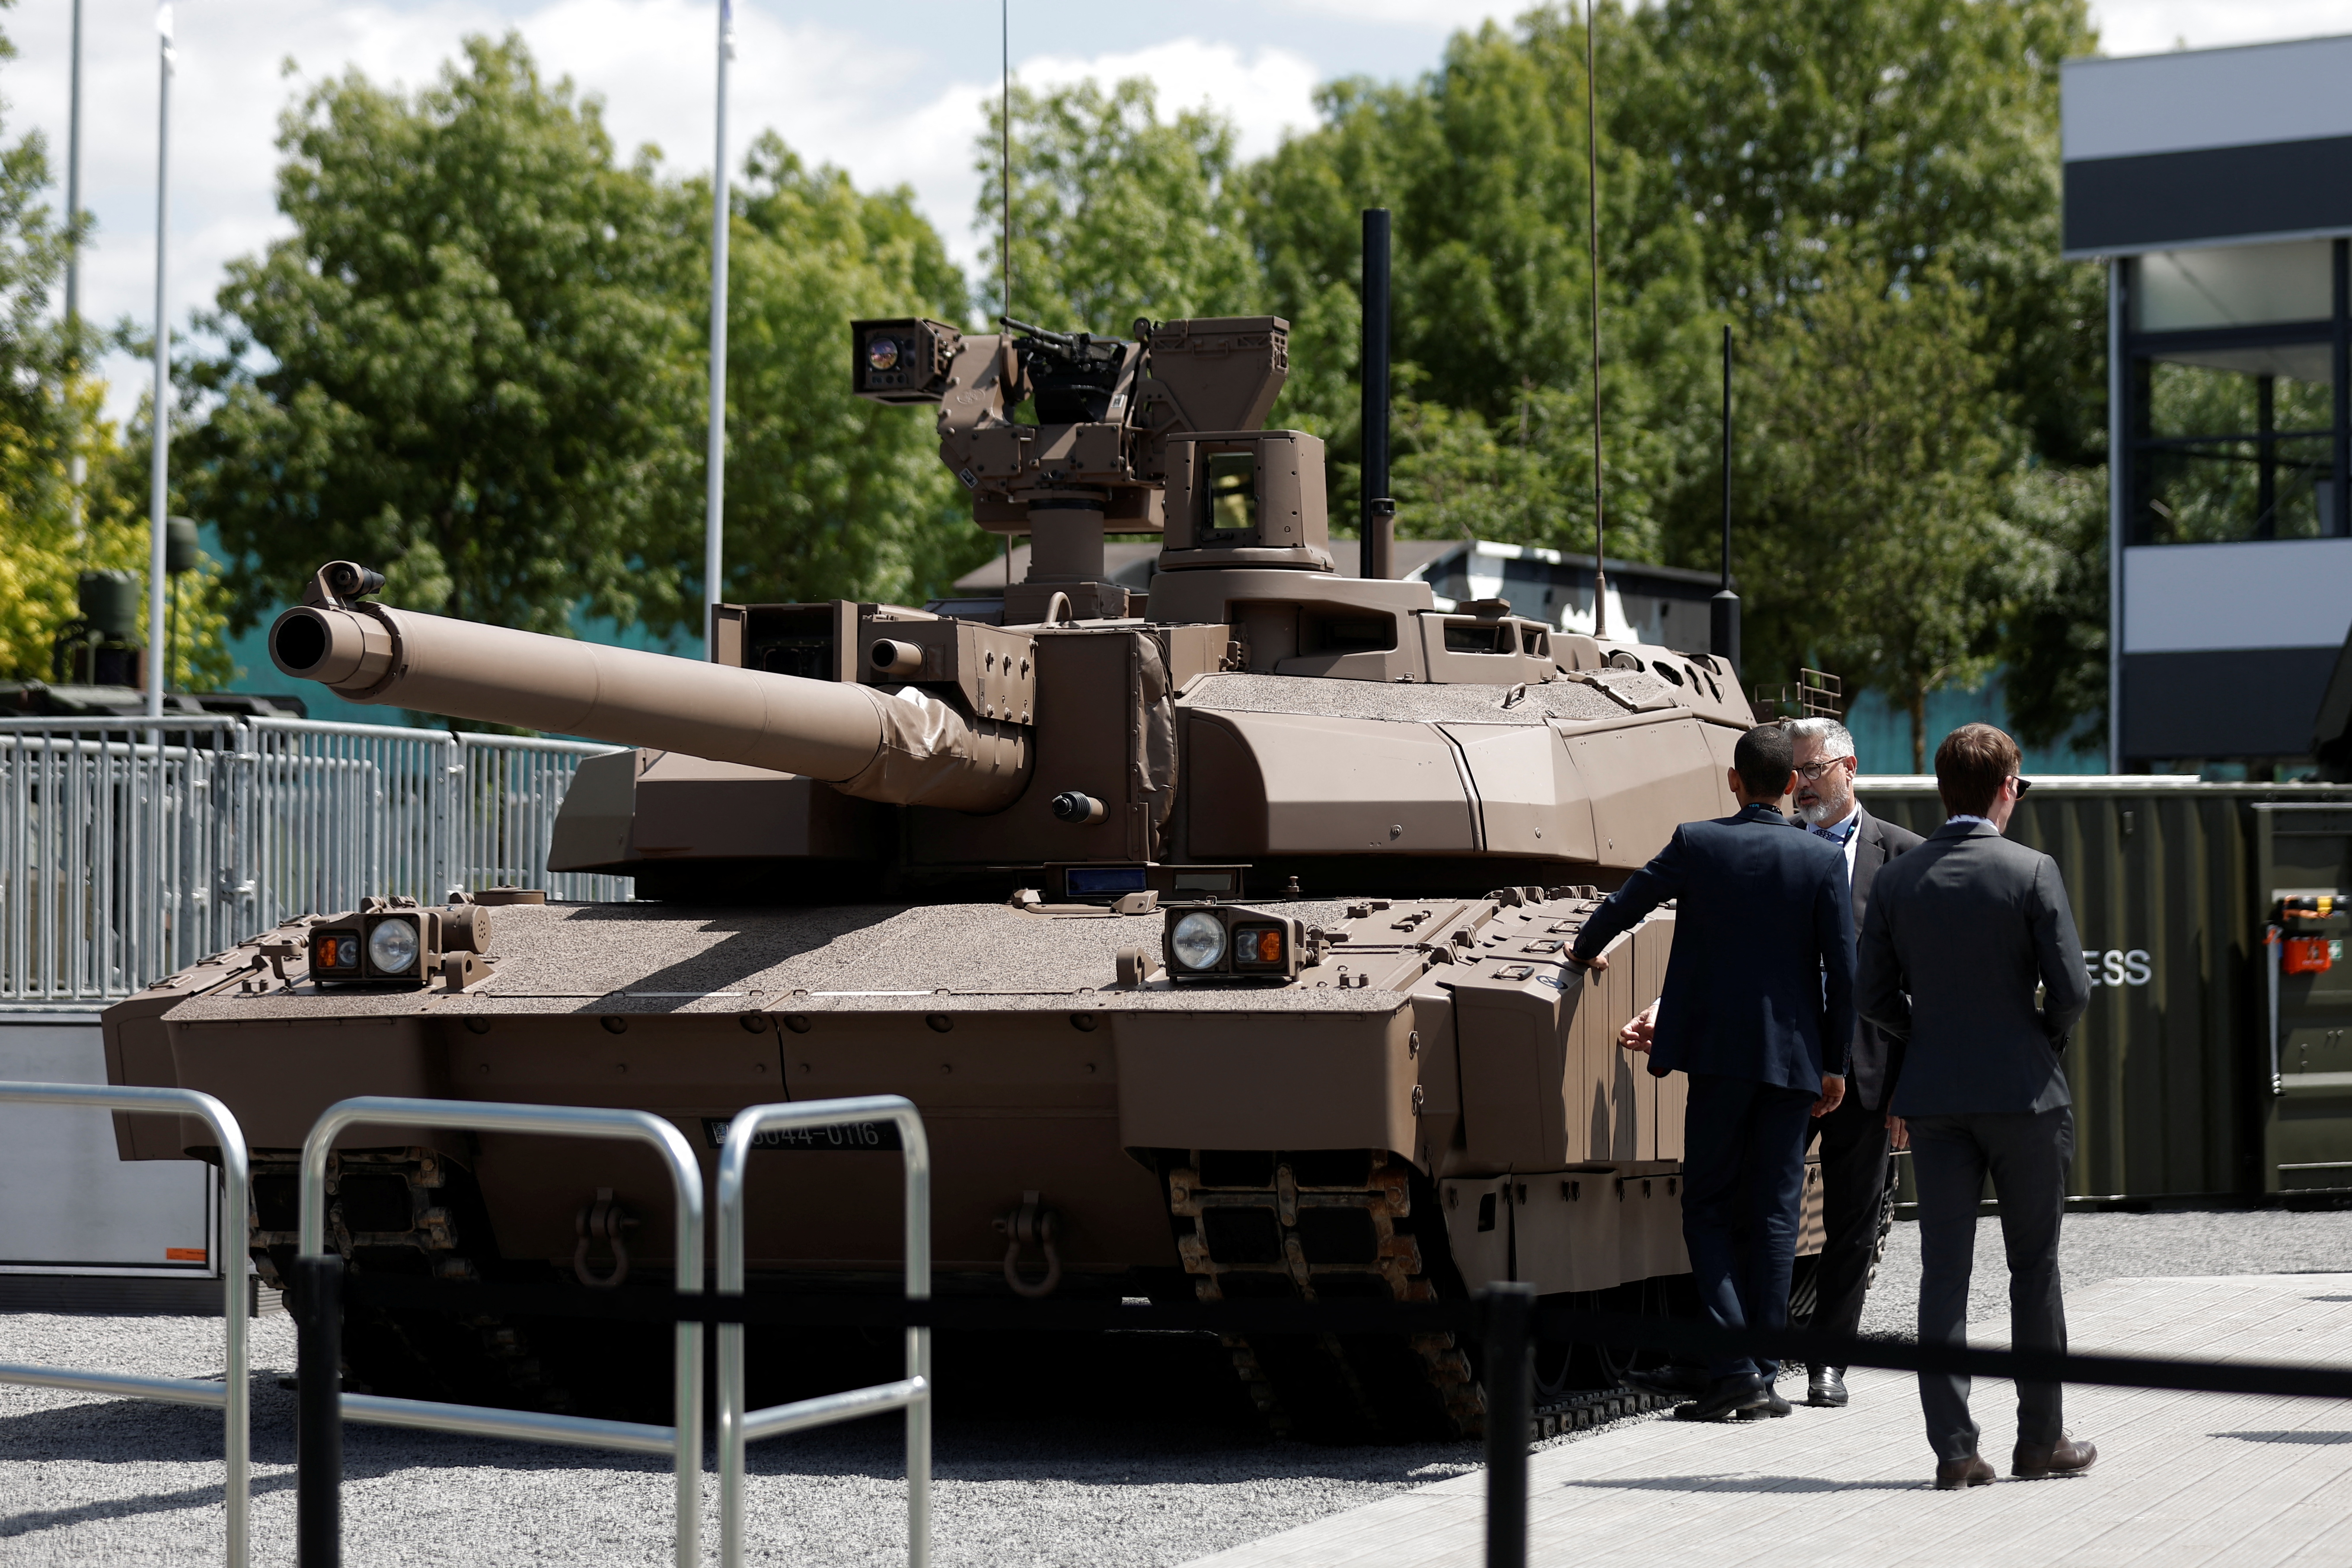 Eurosatory International Defense and Security Expo in Villepinte